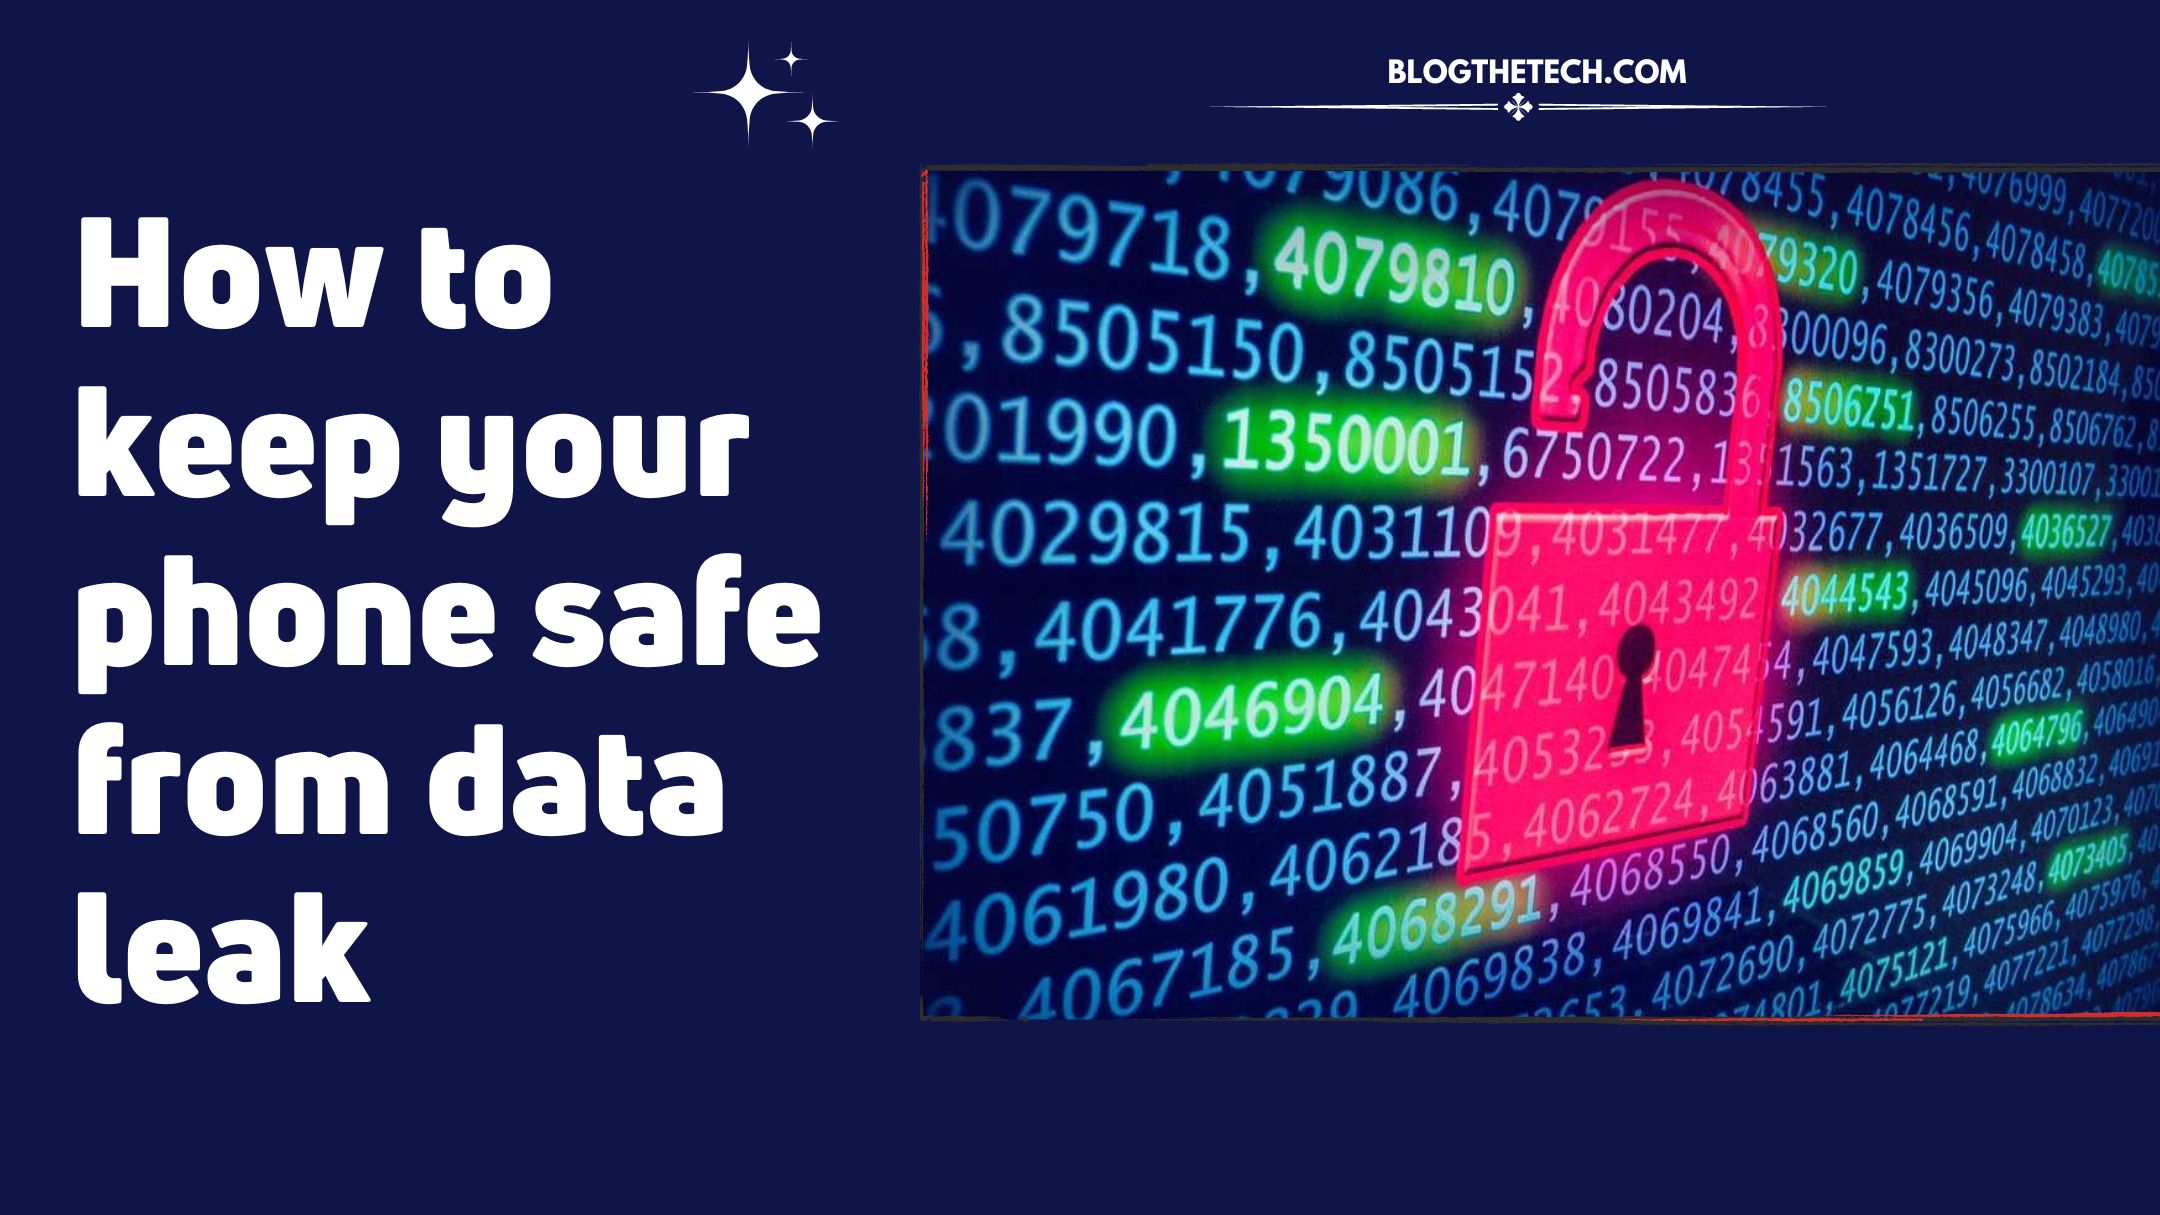 how-to-keep-your-phone-safe-from-data-leaks-featured